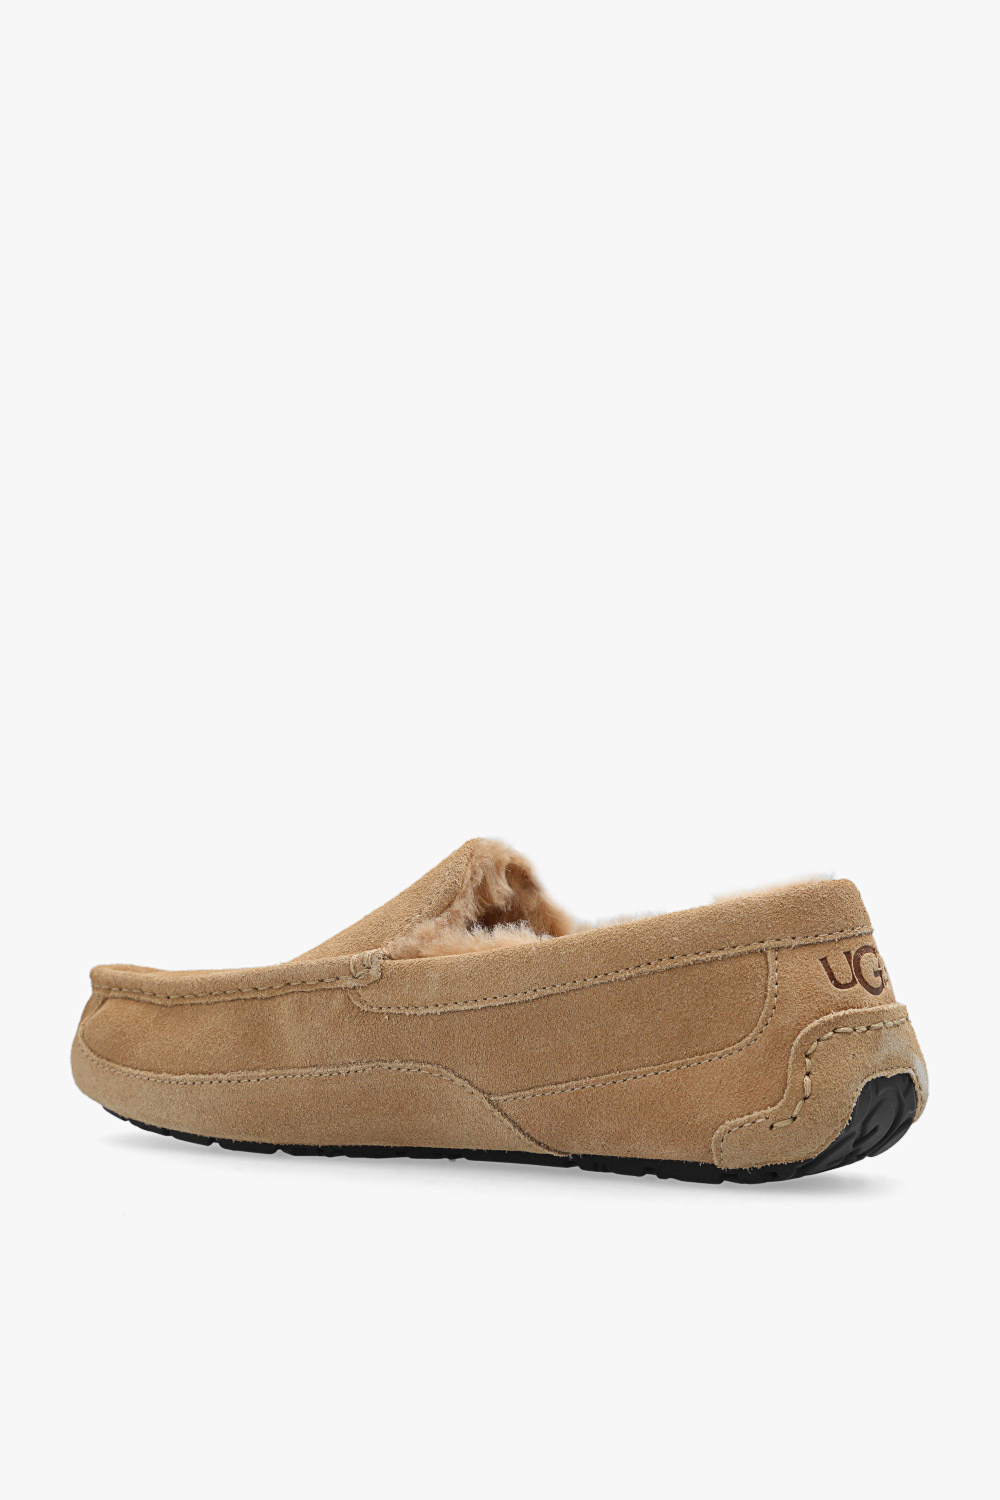 UGG ‘Ascot’ suede moccasins